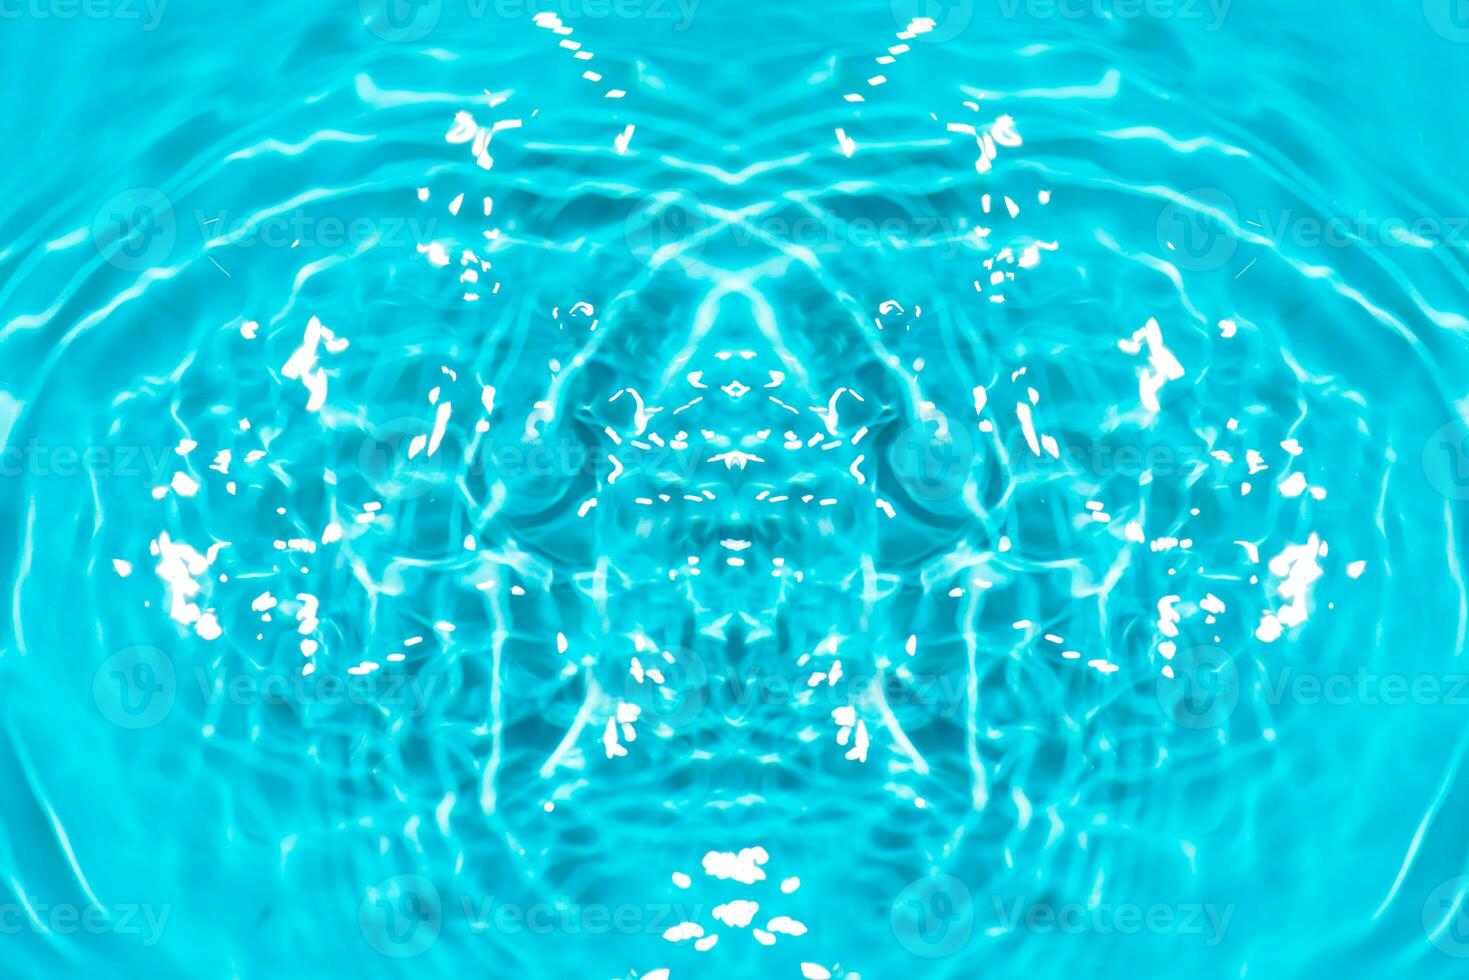 Defocus blurred transparent blue colored clear calm water surface texture with splashes reflection. Trendy abstract nature background. Water waves in sunlight with copy space. Blue watercolor shine. photo